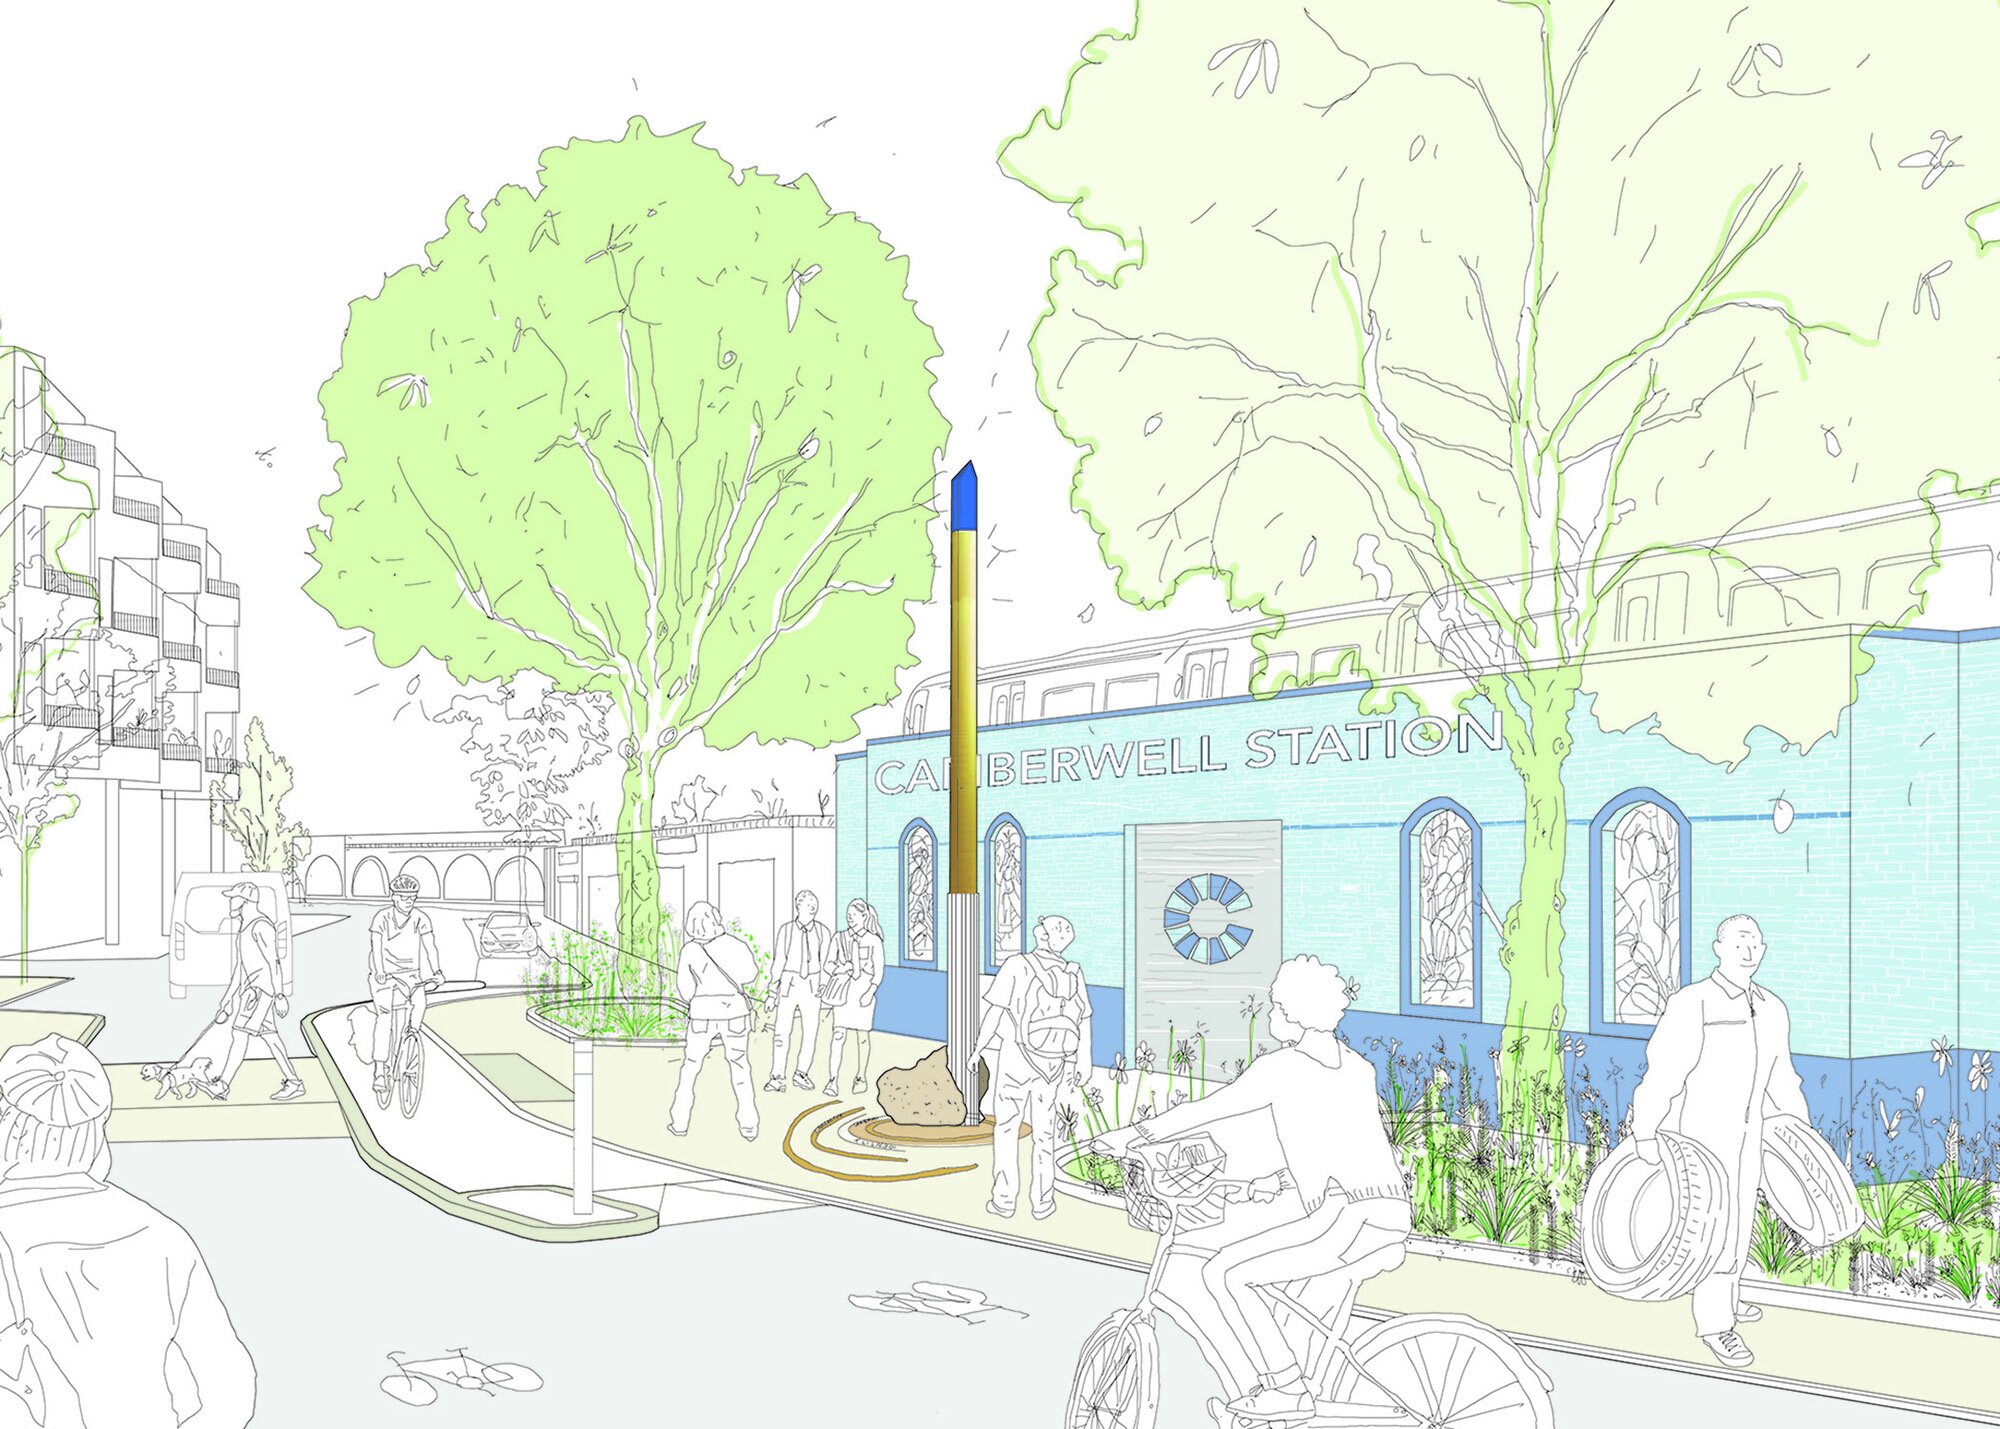 JA-Projects-2022-©Camberwell StRd Area 3 Sketch-01 cropped.jpg